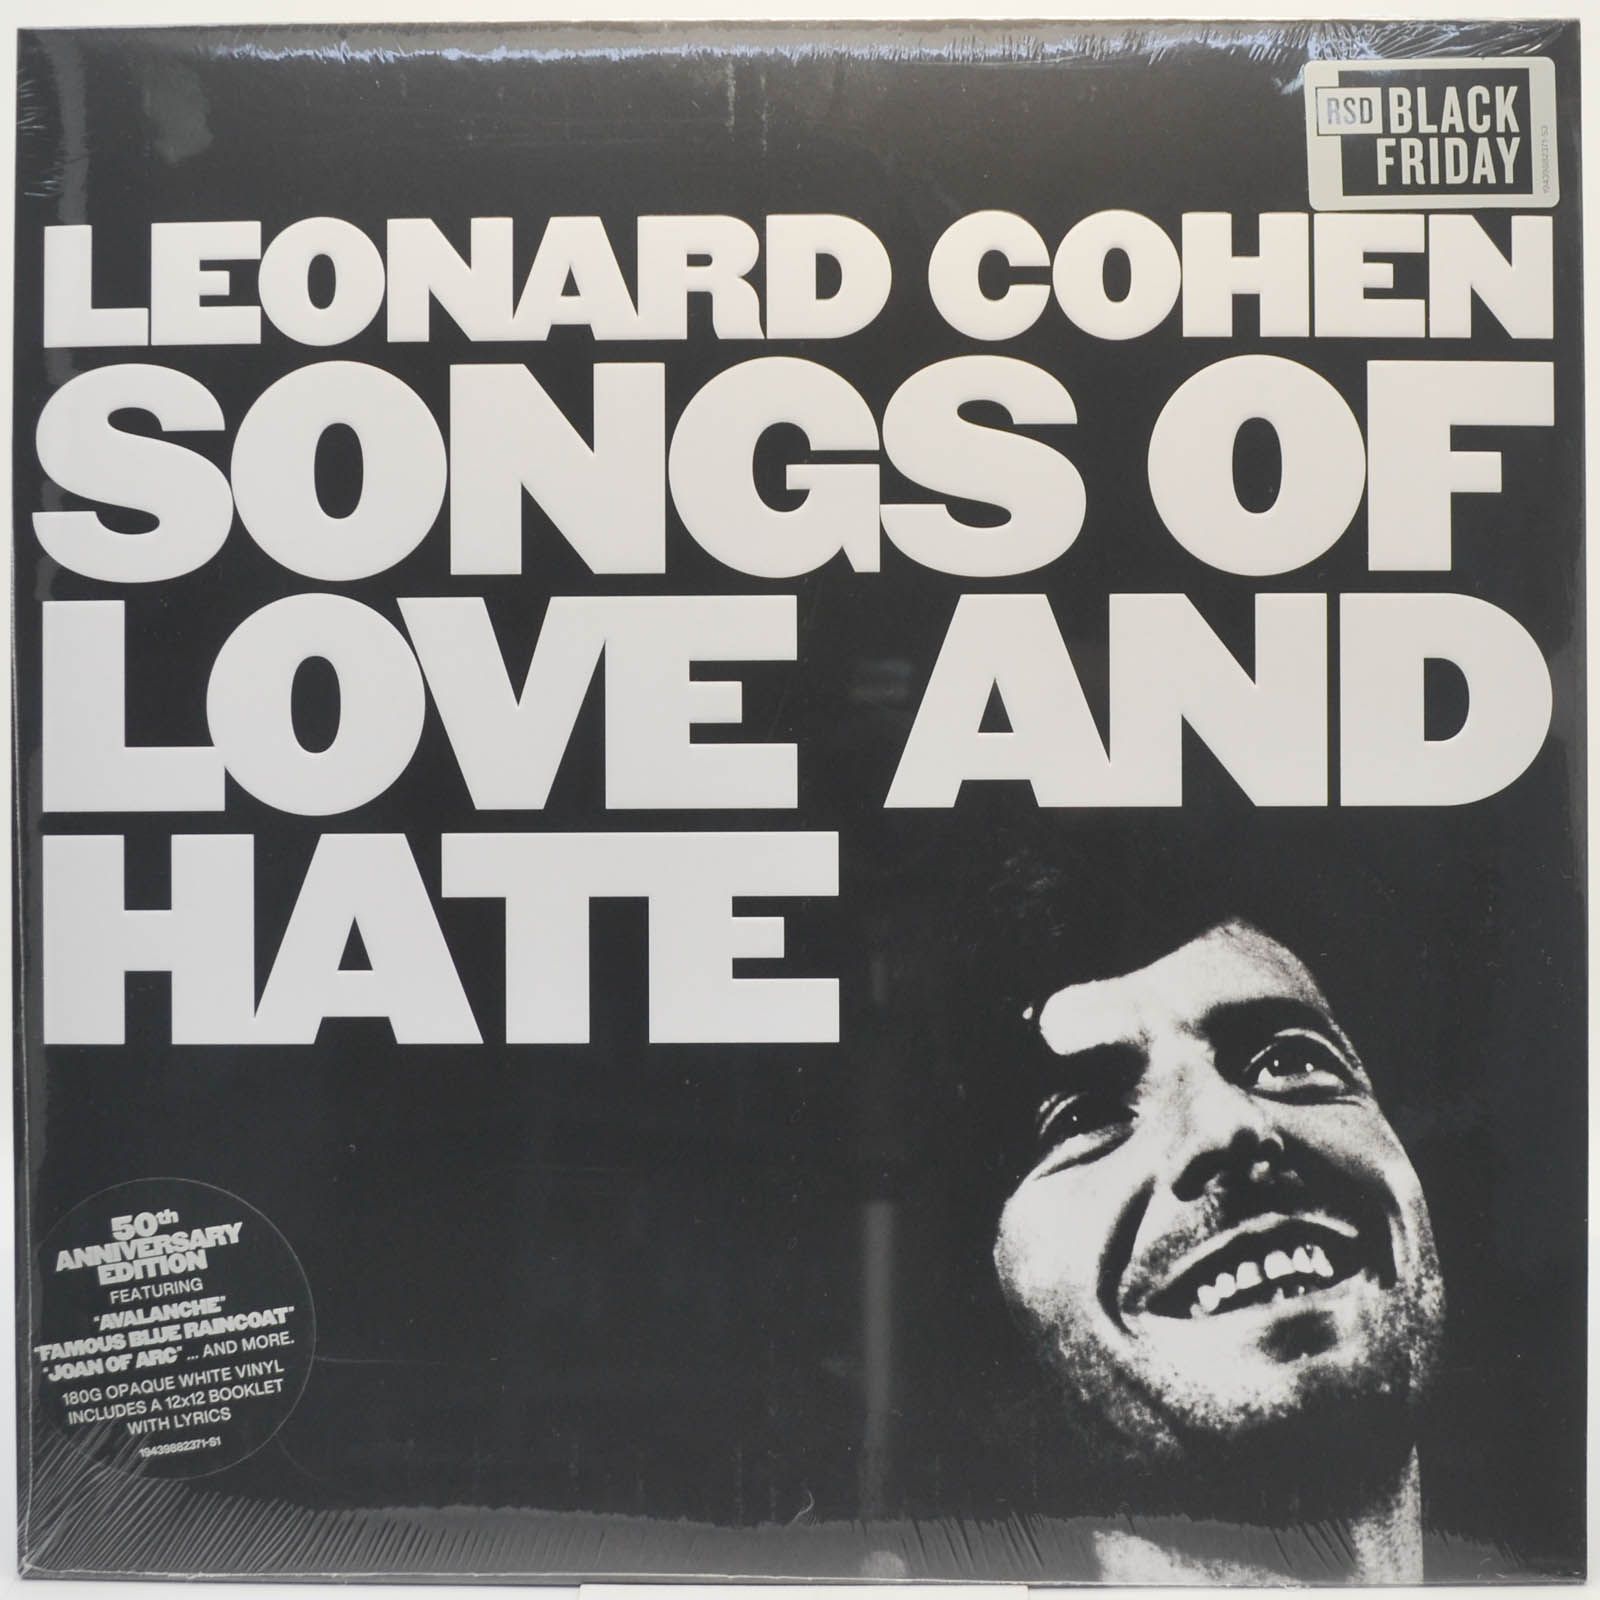 Leonard Cohen — Songs Of Love And Hate, 1971